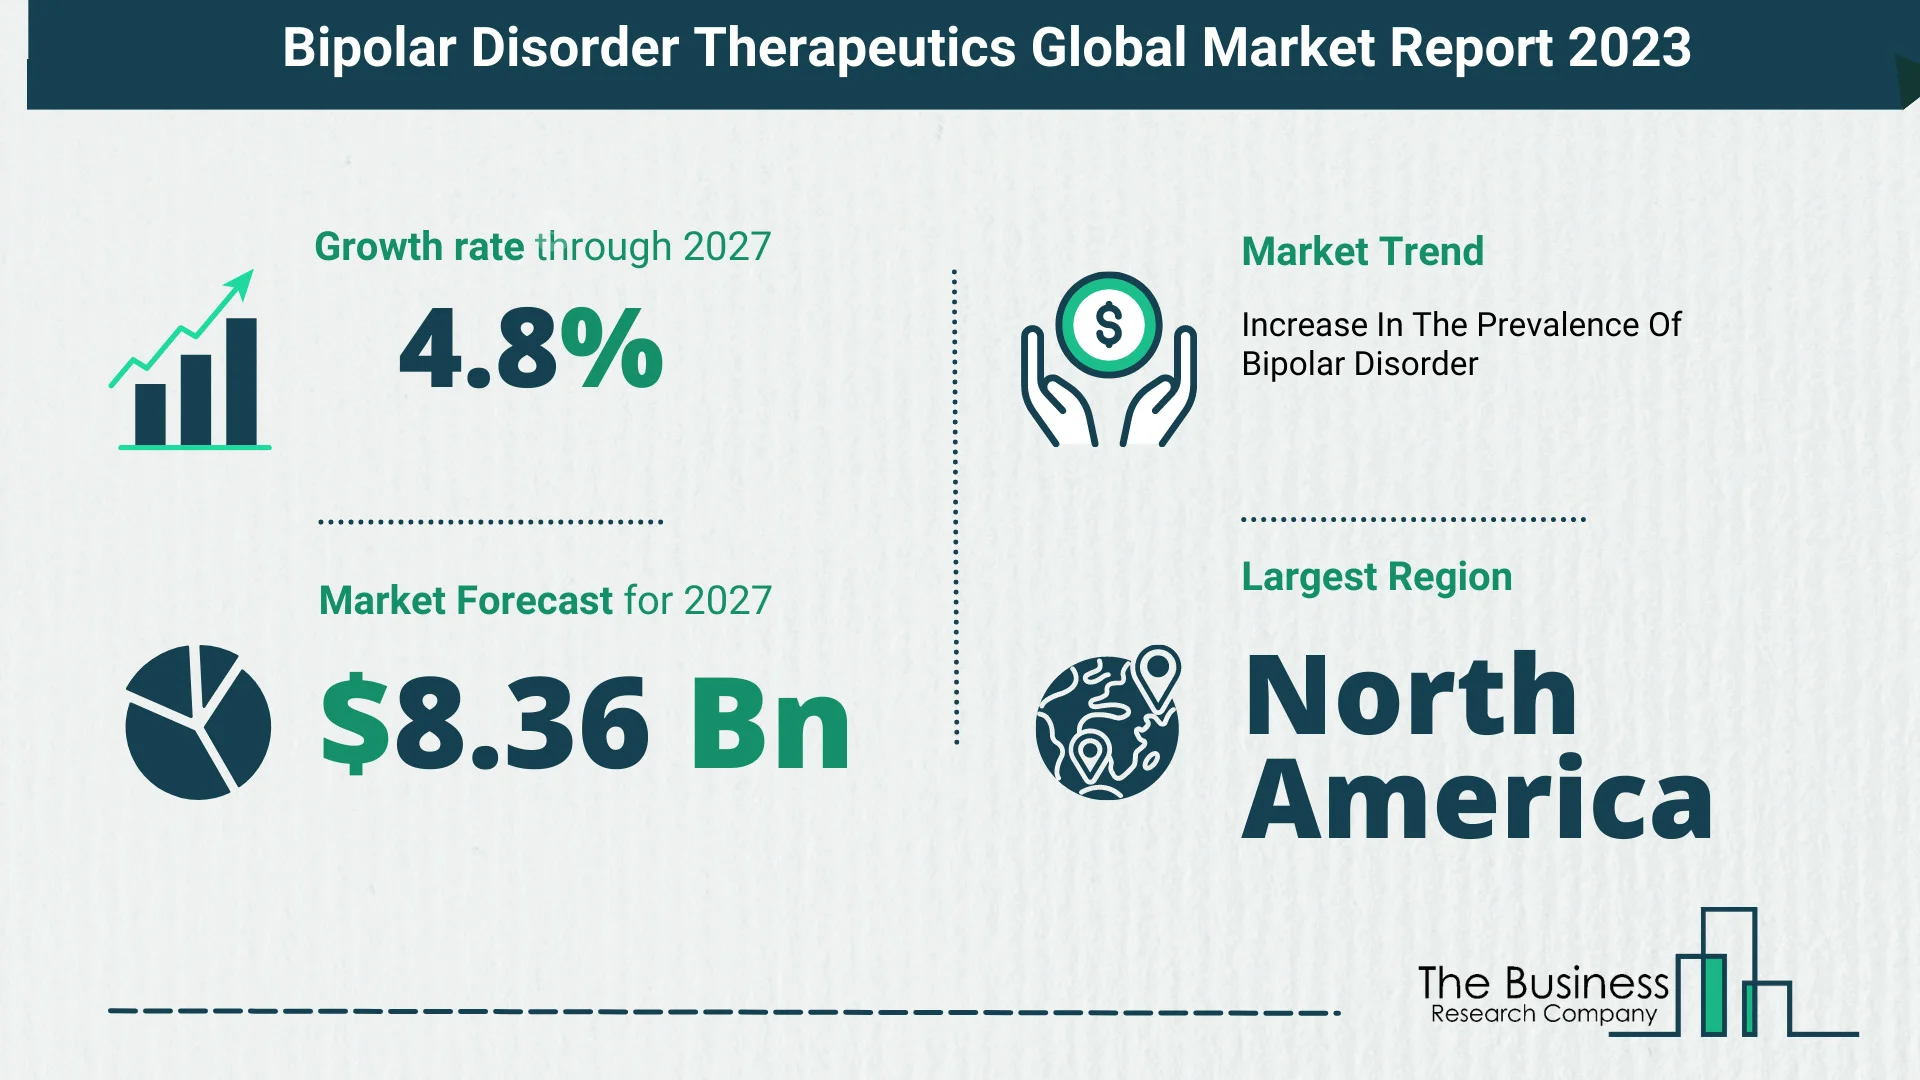 Bipolar Disorder Therapeutics Market Overview: Market Size, Drivers And Trends